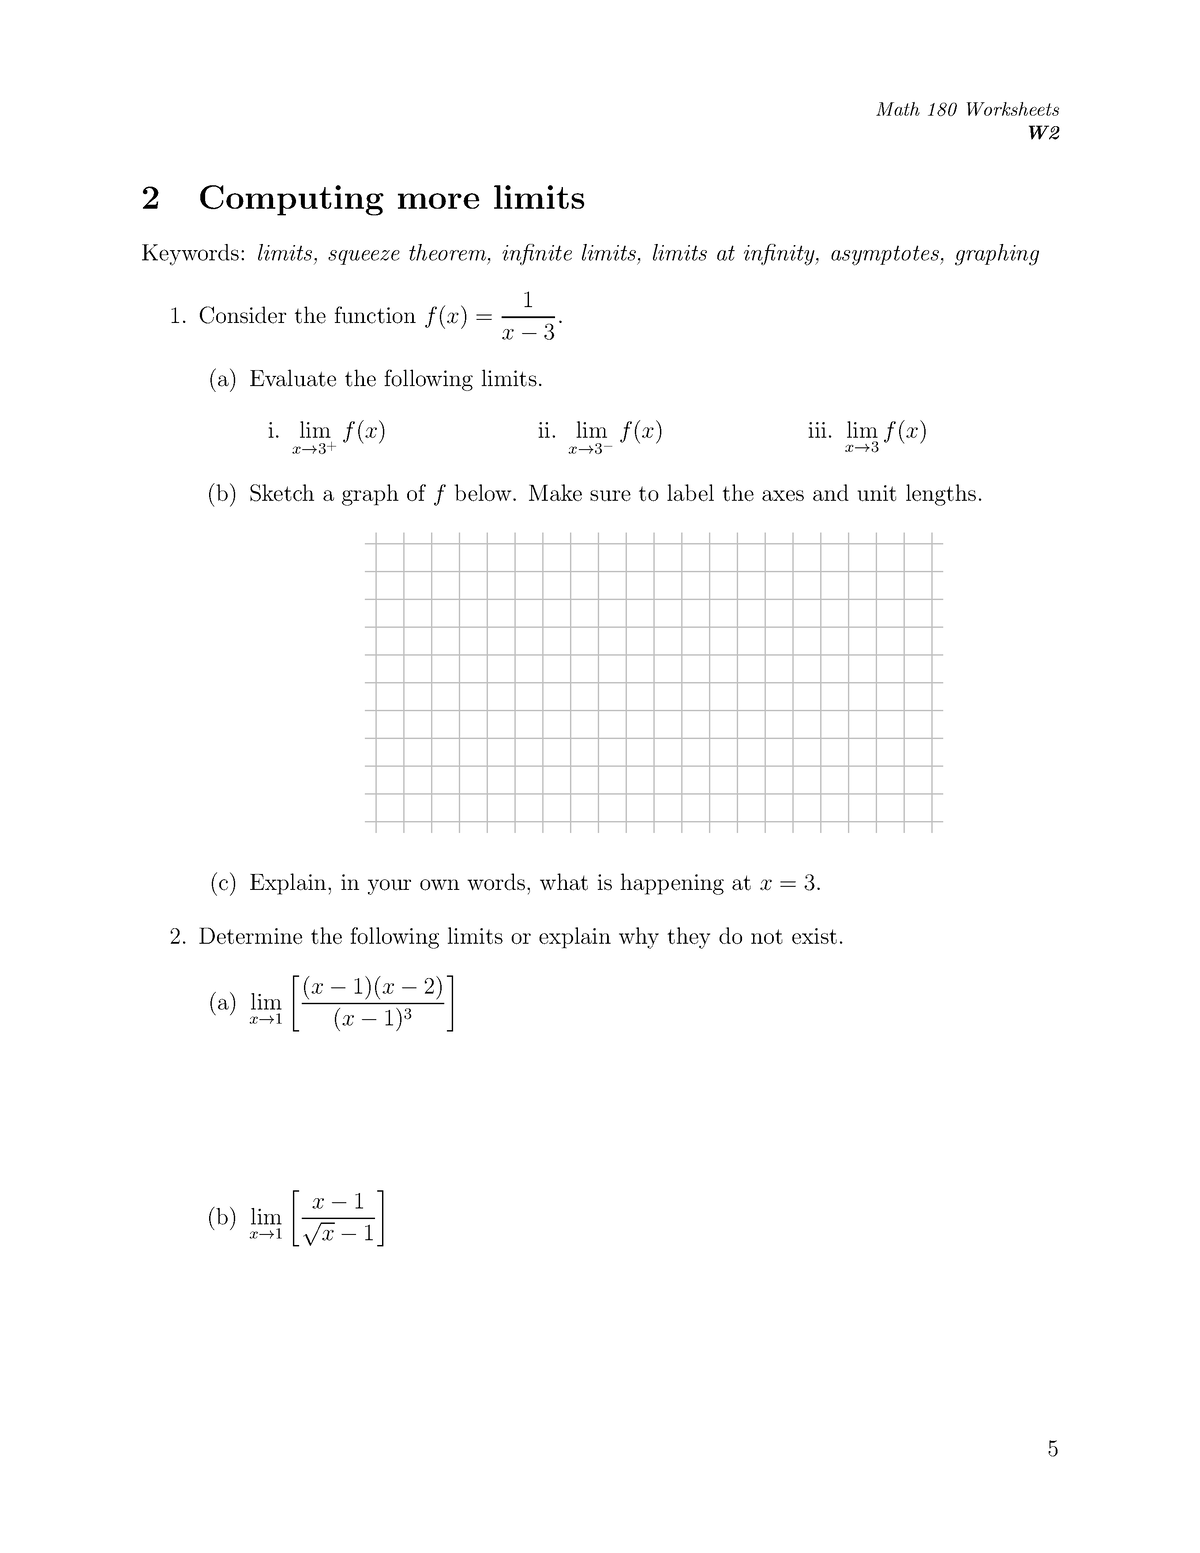 Math 180 Worksheets Answers